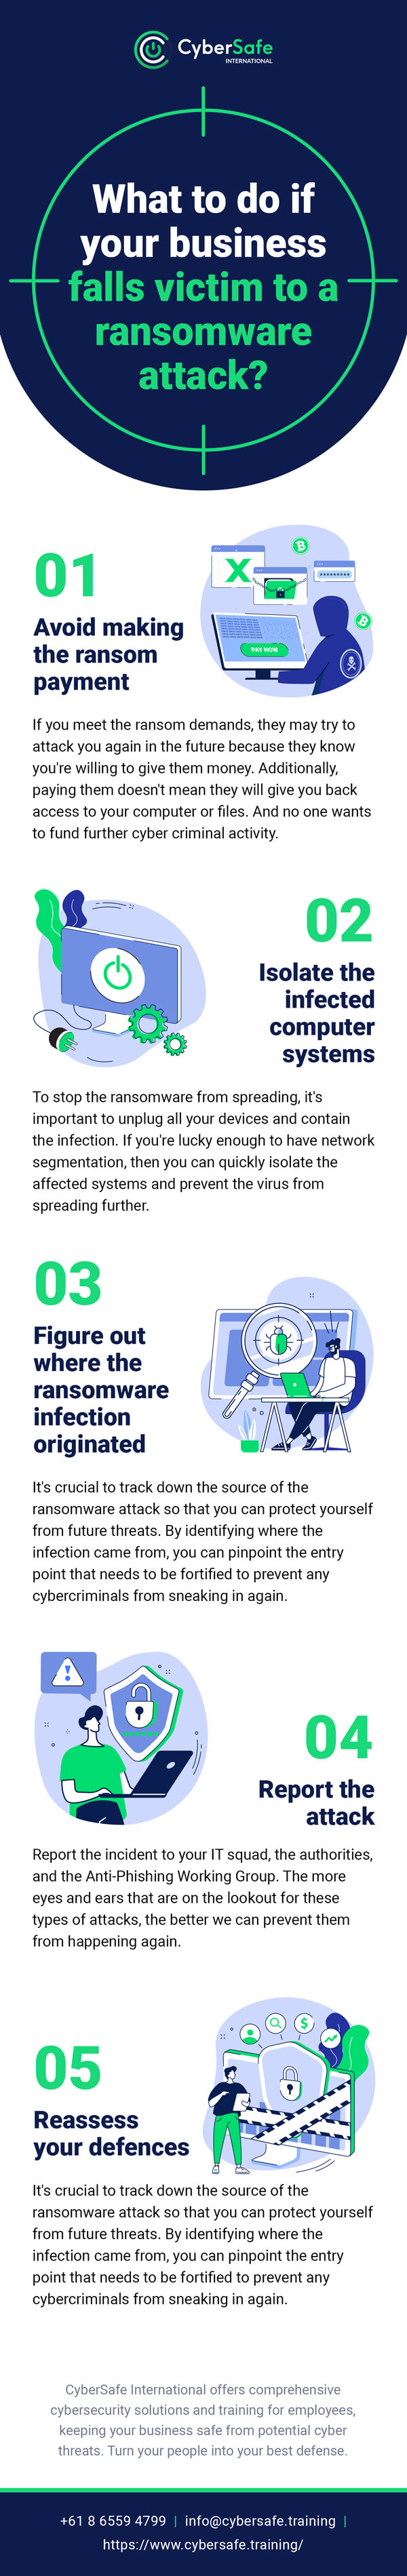 infographic explaining what to do if your business falls victim to a ransomware attack